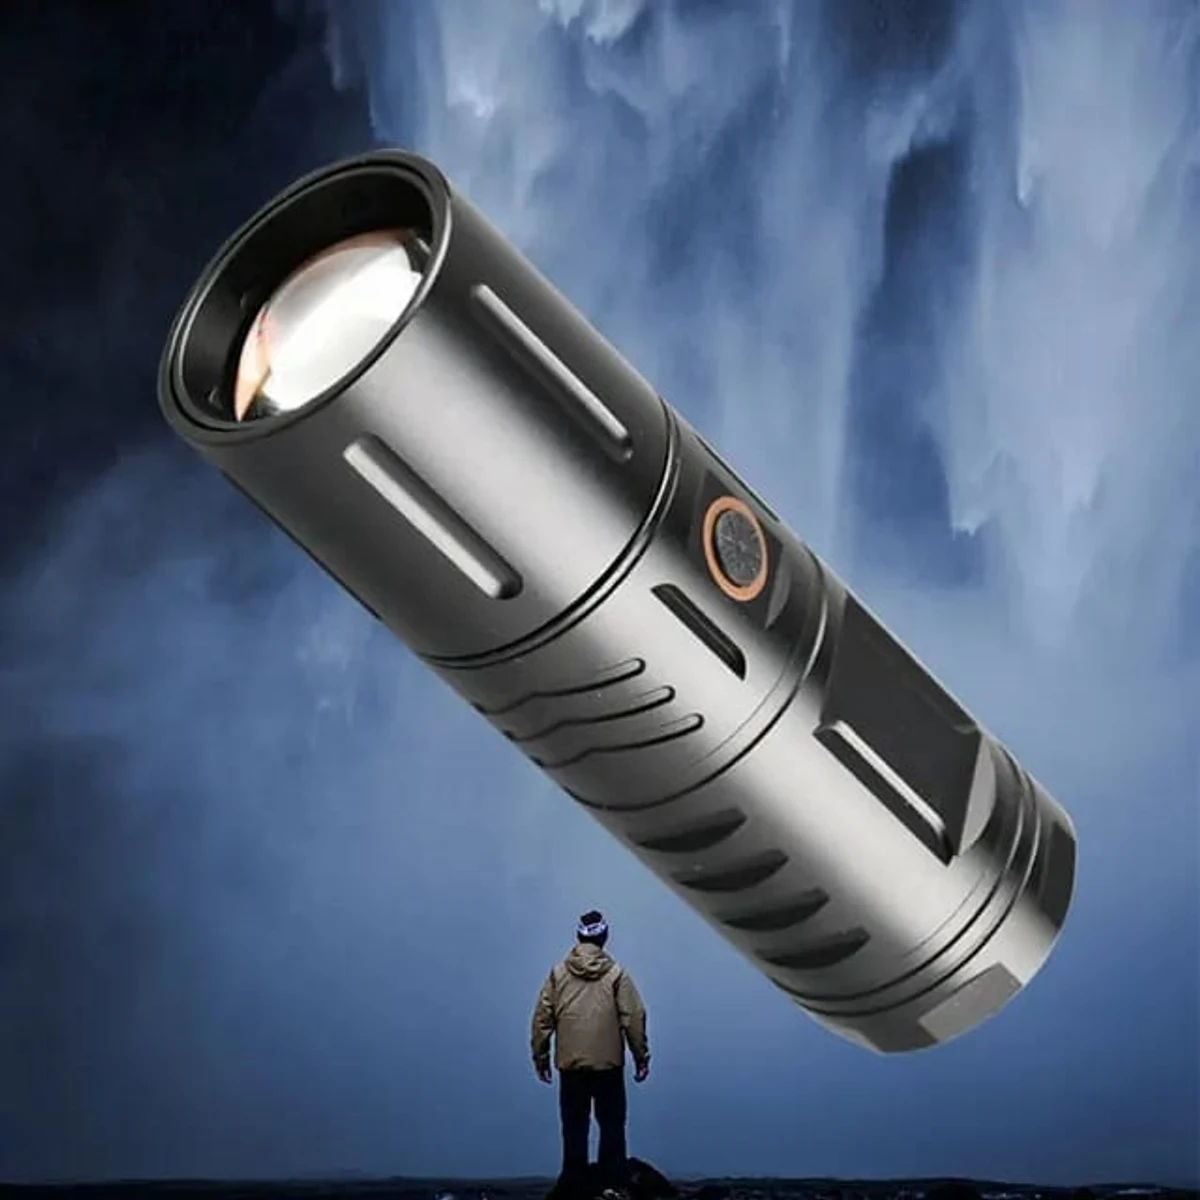 RECHARGEABLE LED ZOOM TORCH LIGHT, WATERPROOF STRONG LED FLASHLIGHT WITH POWER BANK